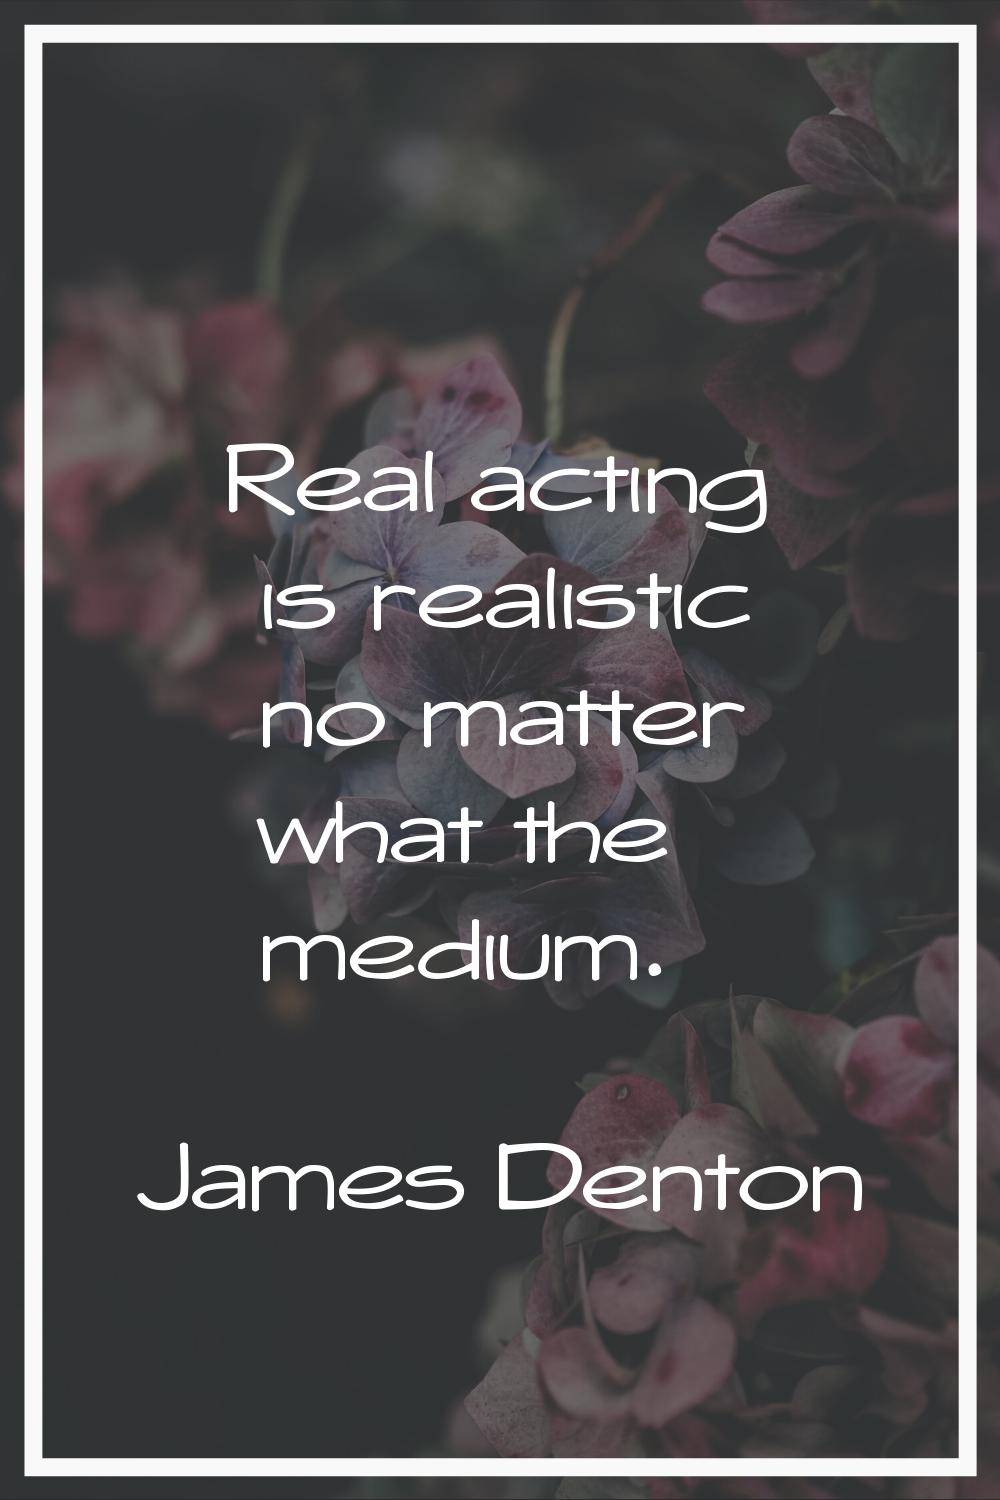 Real acting is realistic no matter what the medium.